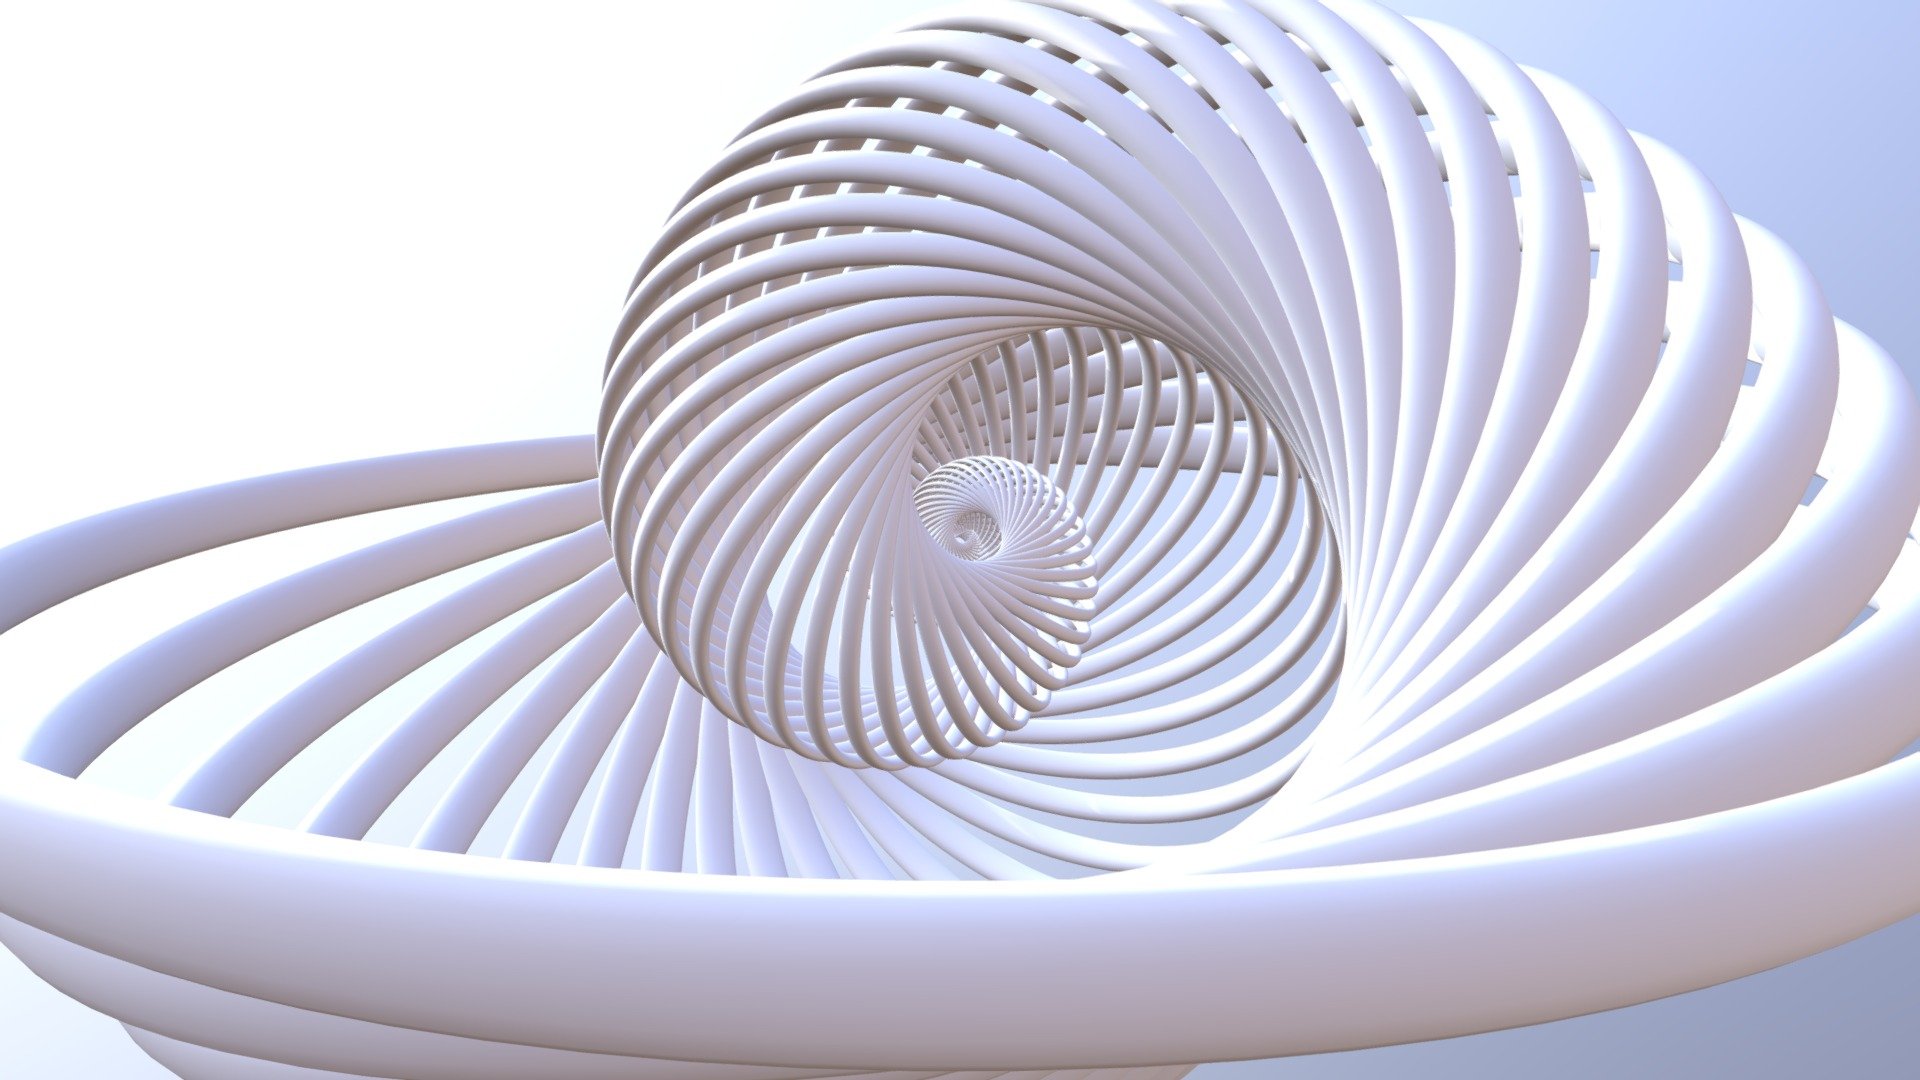 Abstract Object for wallpaper use - KTX Swirl 1 - Download Free 3D model by koelooptiemanna 3d model